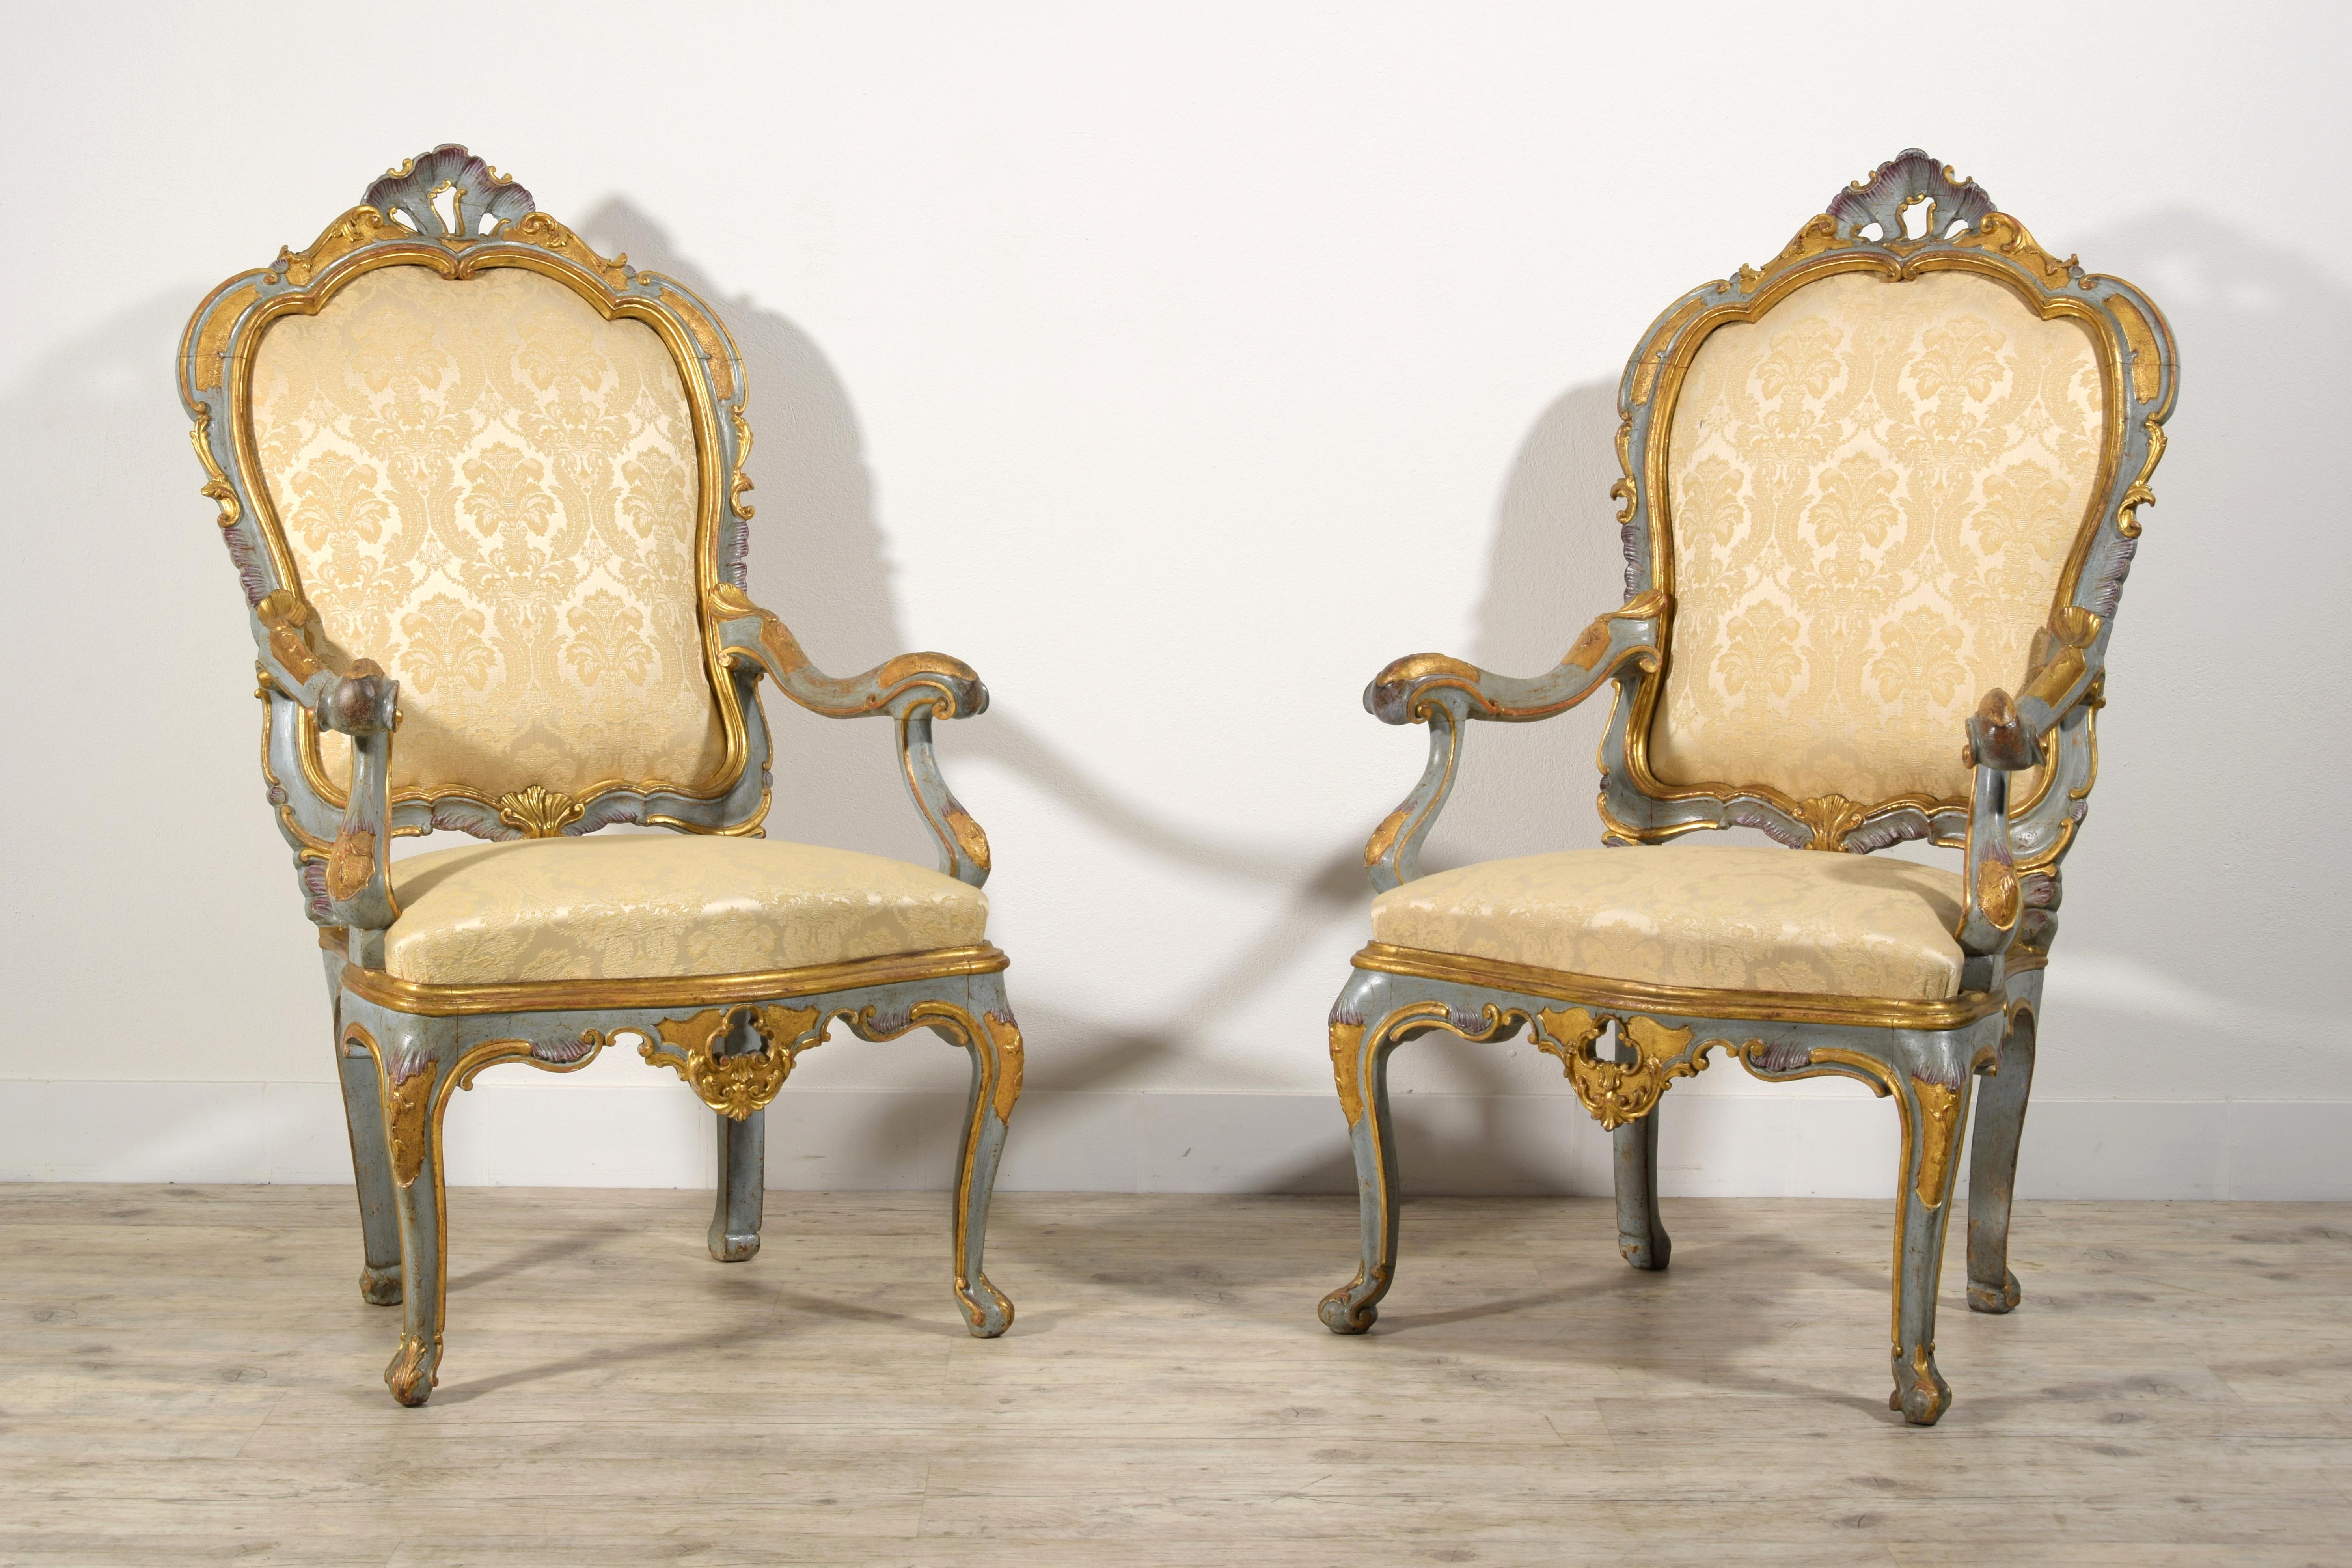 18th Century Pair of Large Venetian Barocchetto Lacquered ed Giltwood Armchairs 

The fine and important pair of large barocchetto armchairs was made in Venice, Italy, in the mid-eighteenth century.
The structure is in finely carved walnut wood,